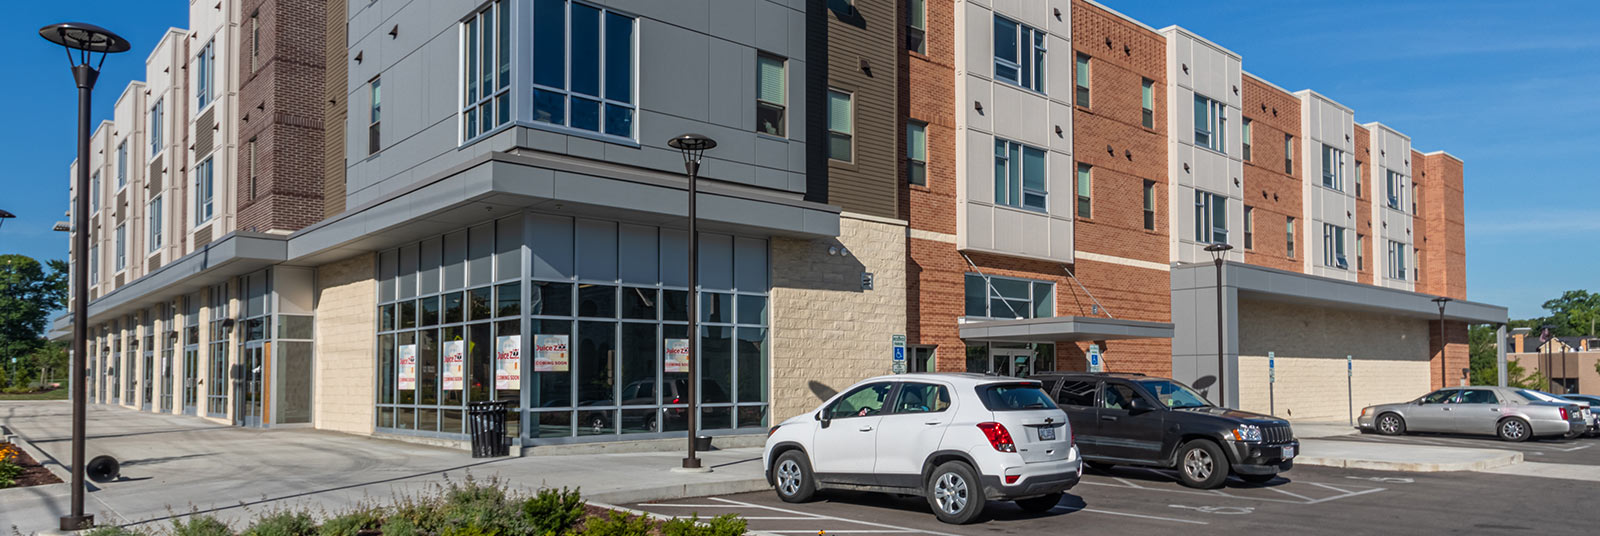 View of the Avondale Center with first-floor commercial space + multi-story housing.